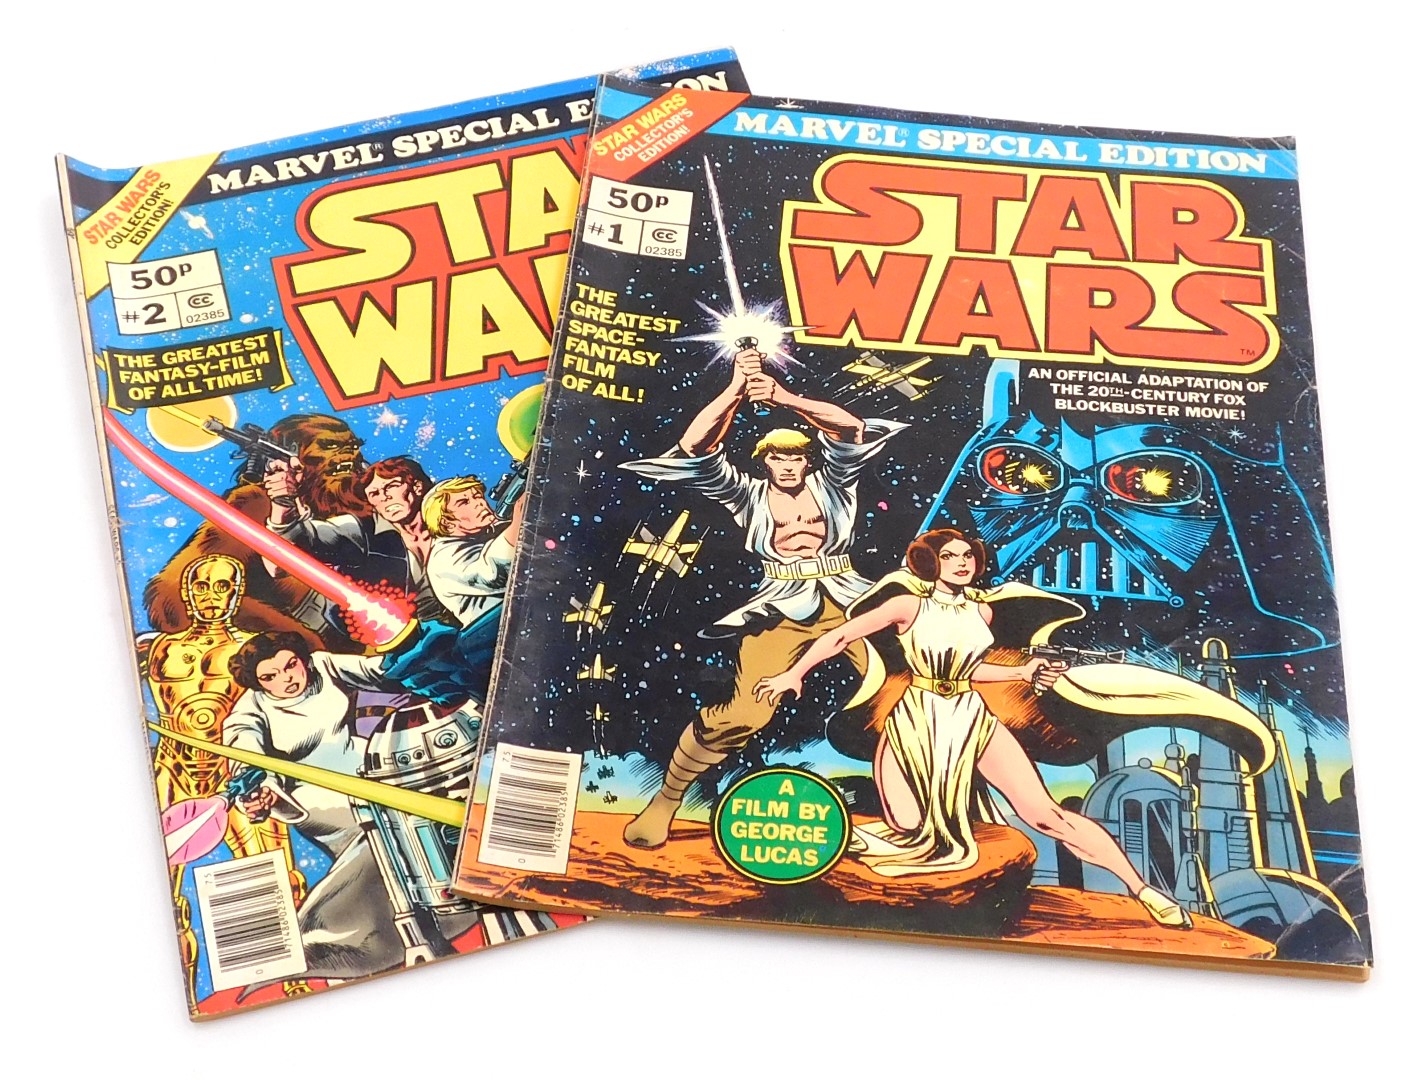 Marvel comics. Two editions of Marvel Special Edition (Star Wars), Issues 1,2. (Bronze Age).